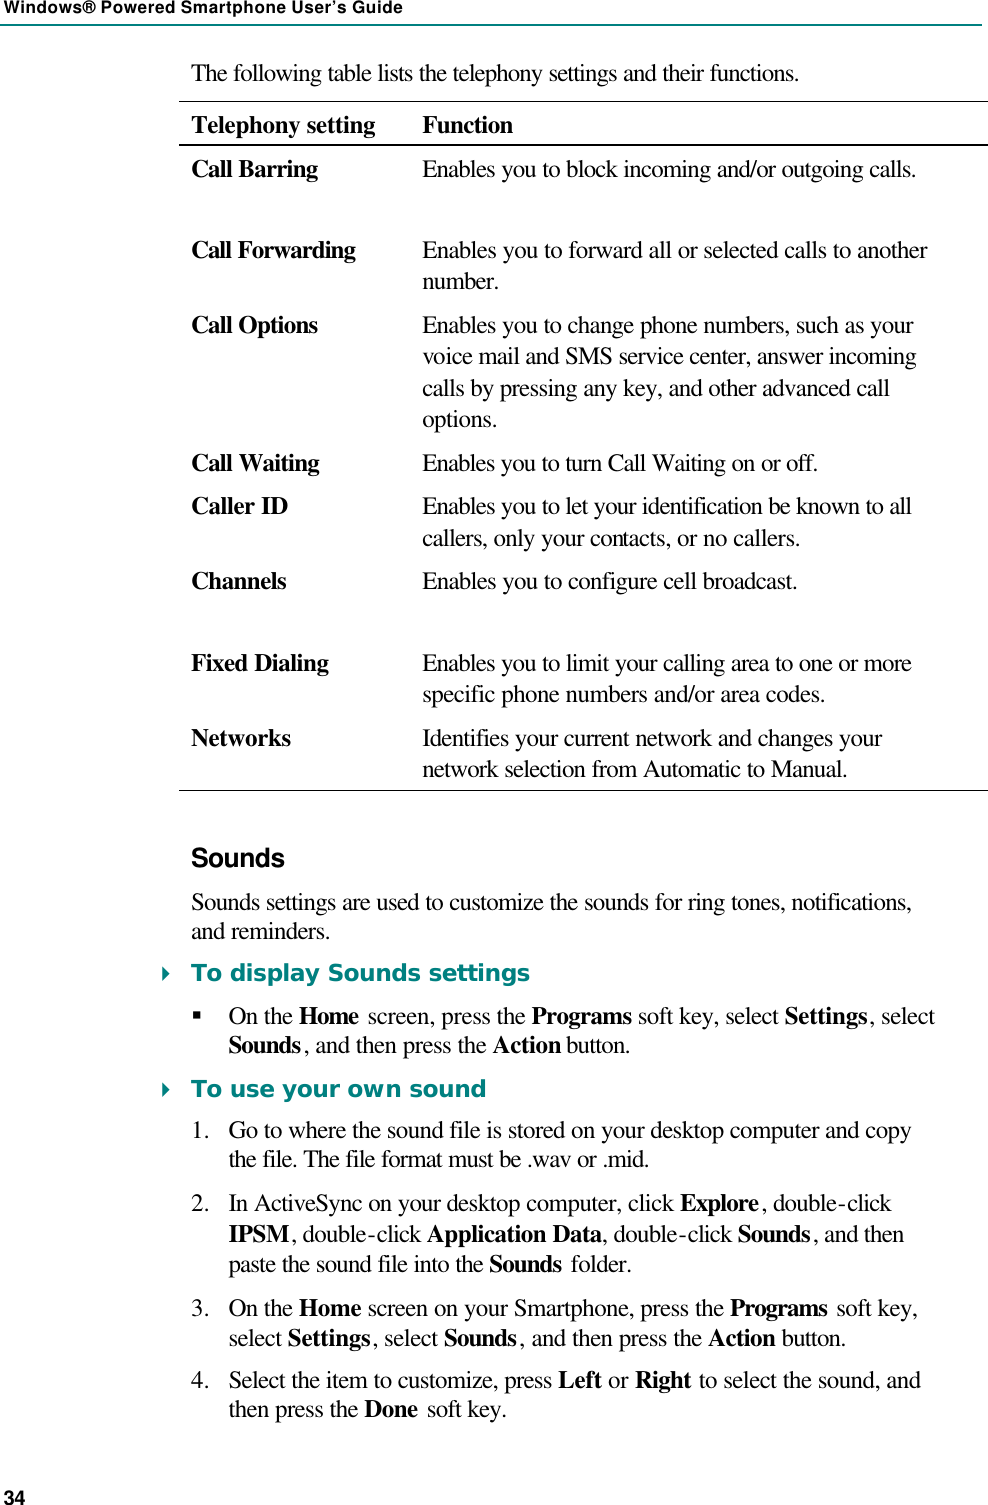 Windows® Powered Smartphone User’s Guide 34 The following table lists the telephony settings and their functions. Telephony setting Function Call Barring Enables you to block incoming and/or outgoing calls.  Call Forwarding Enables you to forward all or selected calls to another number. Call Options Enables you to change phone numbers, such as your voice mail and SMS service center, answer incoming calls by pressing any key, and other advanced call options.  Call Waiting Enables you to turn Call Waiting on or off. Caller ID Enables you to let your identification be known to all callers, only your contacts, or no callers. Channels Enables you to configure cell broadcast.  Fixed Dialing Enables you to limit your calling area to one or more specific phone numbers and/or area codes. Networks Identifies your current network and changes your network selection from Automatic to Manual. Sounds Sounds settings are used to customize the sounds for ring tones, notifications, and reminders. 4 To display Sounds settings § On the Home screen, press the Programs soft key, select Settings, select Sounds, and then press the Action button. 4 To use your own sound 1.  Go to where the sound file is stored on your desktop computer and copy the file. The file format must be .wav or .mid. 2.  In ActiveSync on your desktop computer, click Explore, double-click IPSM, double-click Application Data, double-click Sounds, and then paste the sound file into the Sounds folder. 3.  On the Home screen on your Smartphone, press the Programs soft key, select Settings, select Sounds, and then press the Action button. 4.  Select the item to customize, press Left or Right to select the sound, and then press the Done soft key. 